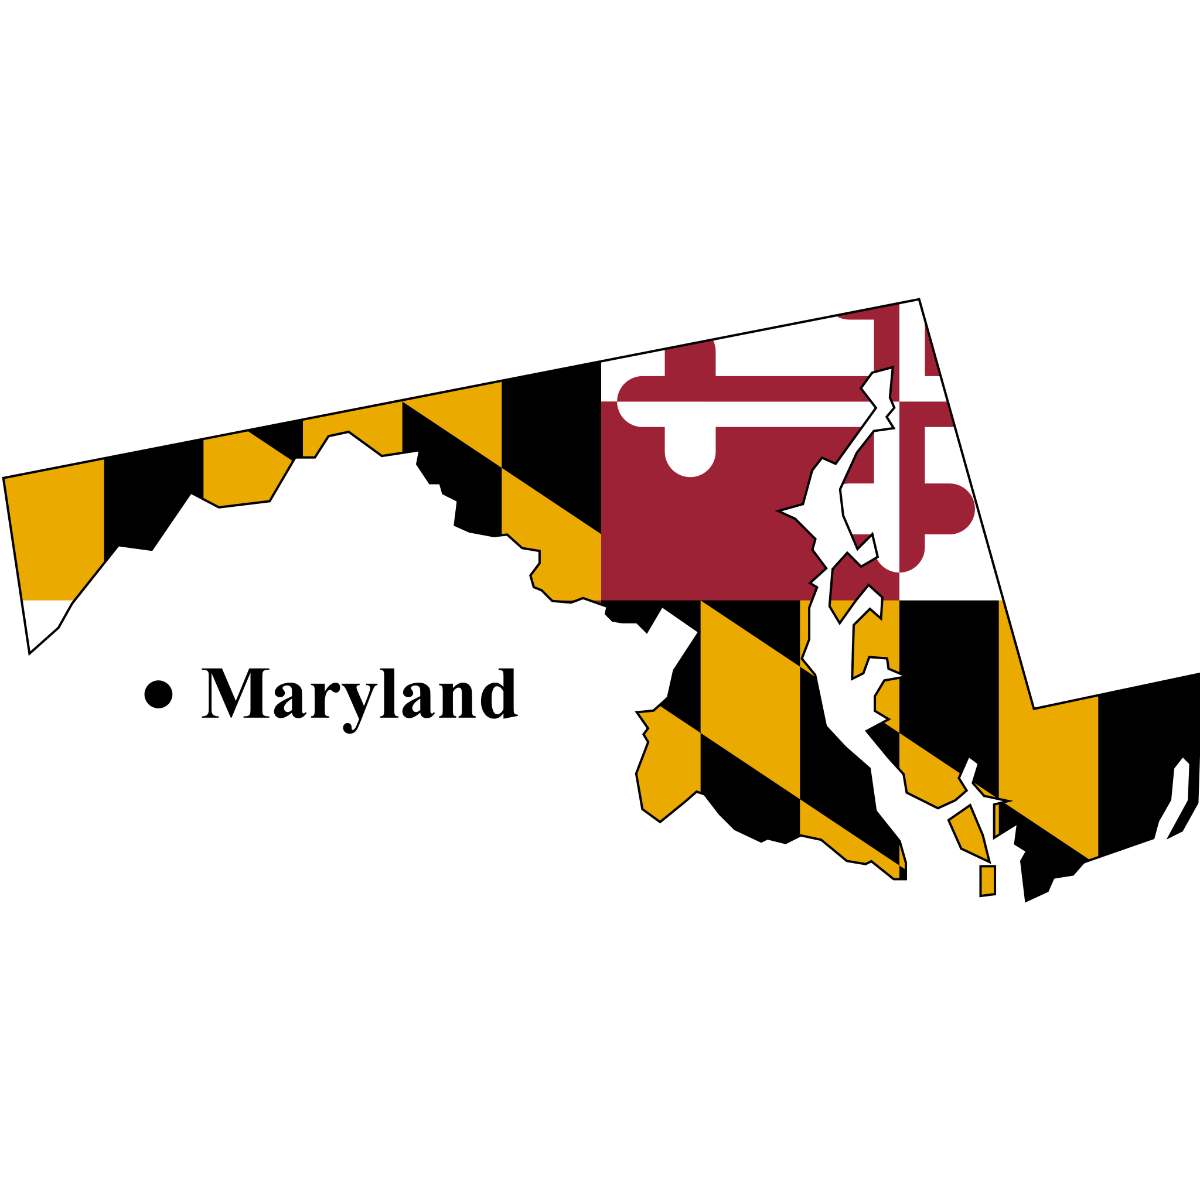 Maryland State map cutout with Maryland flag superimposed